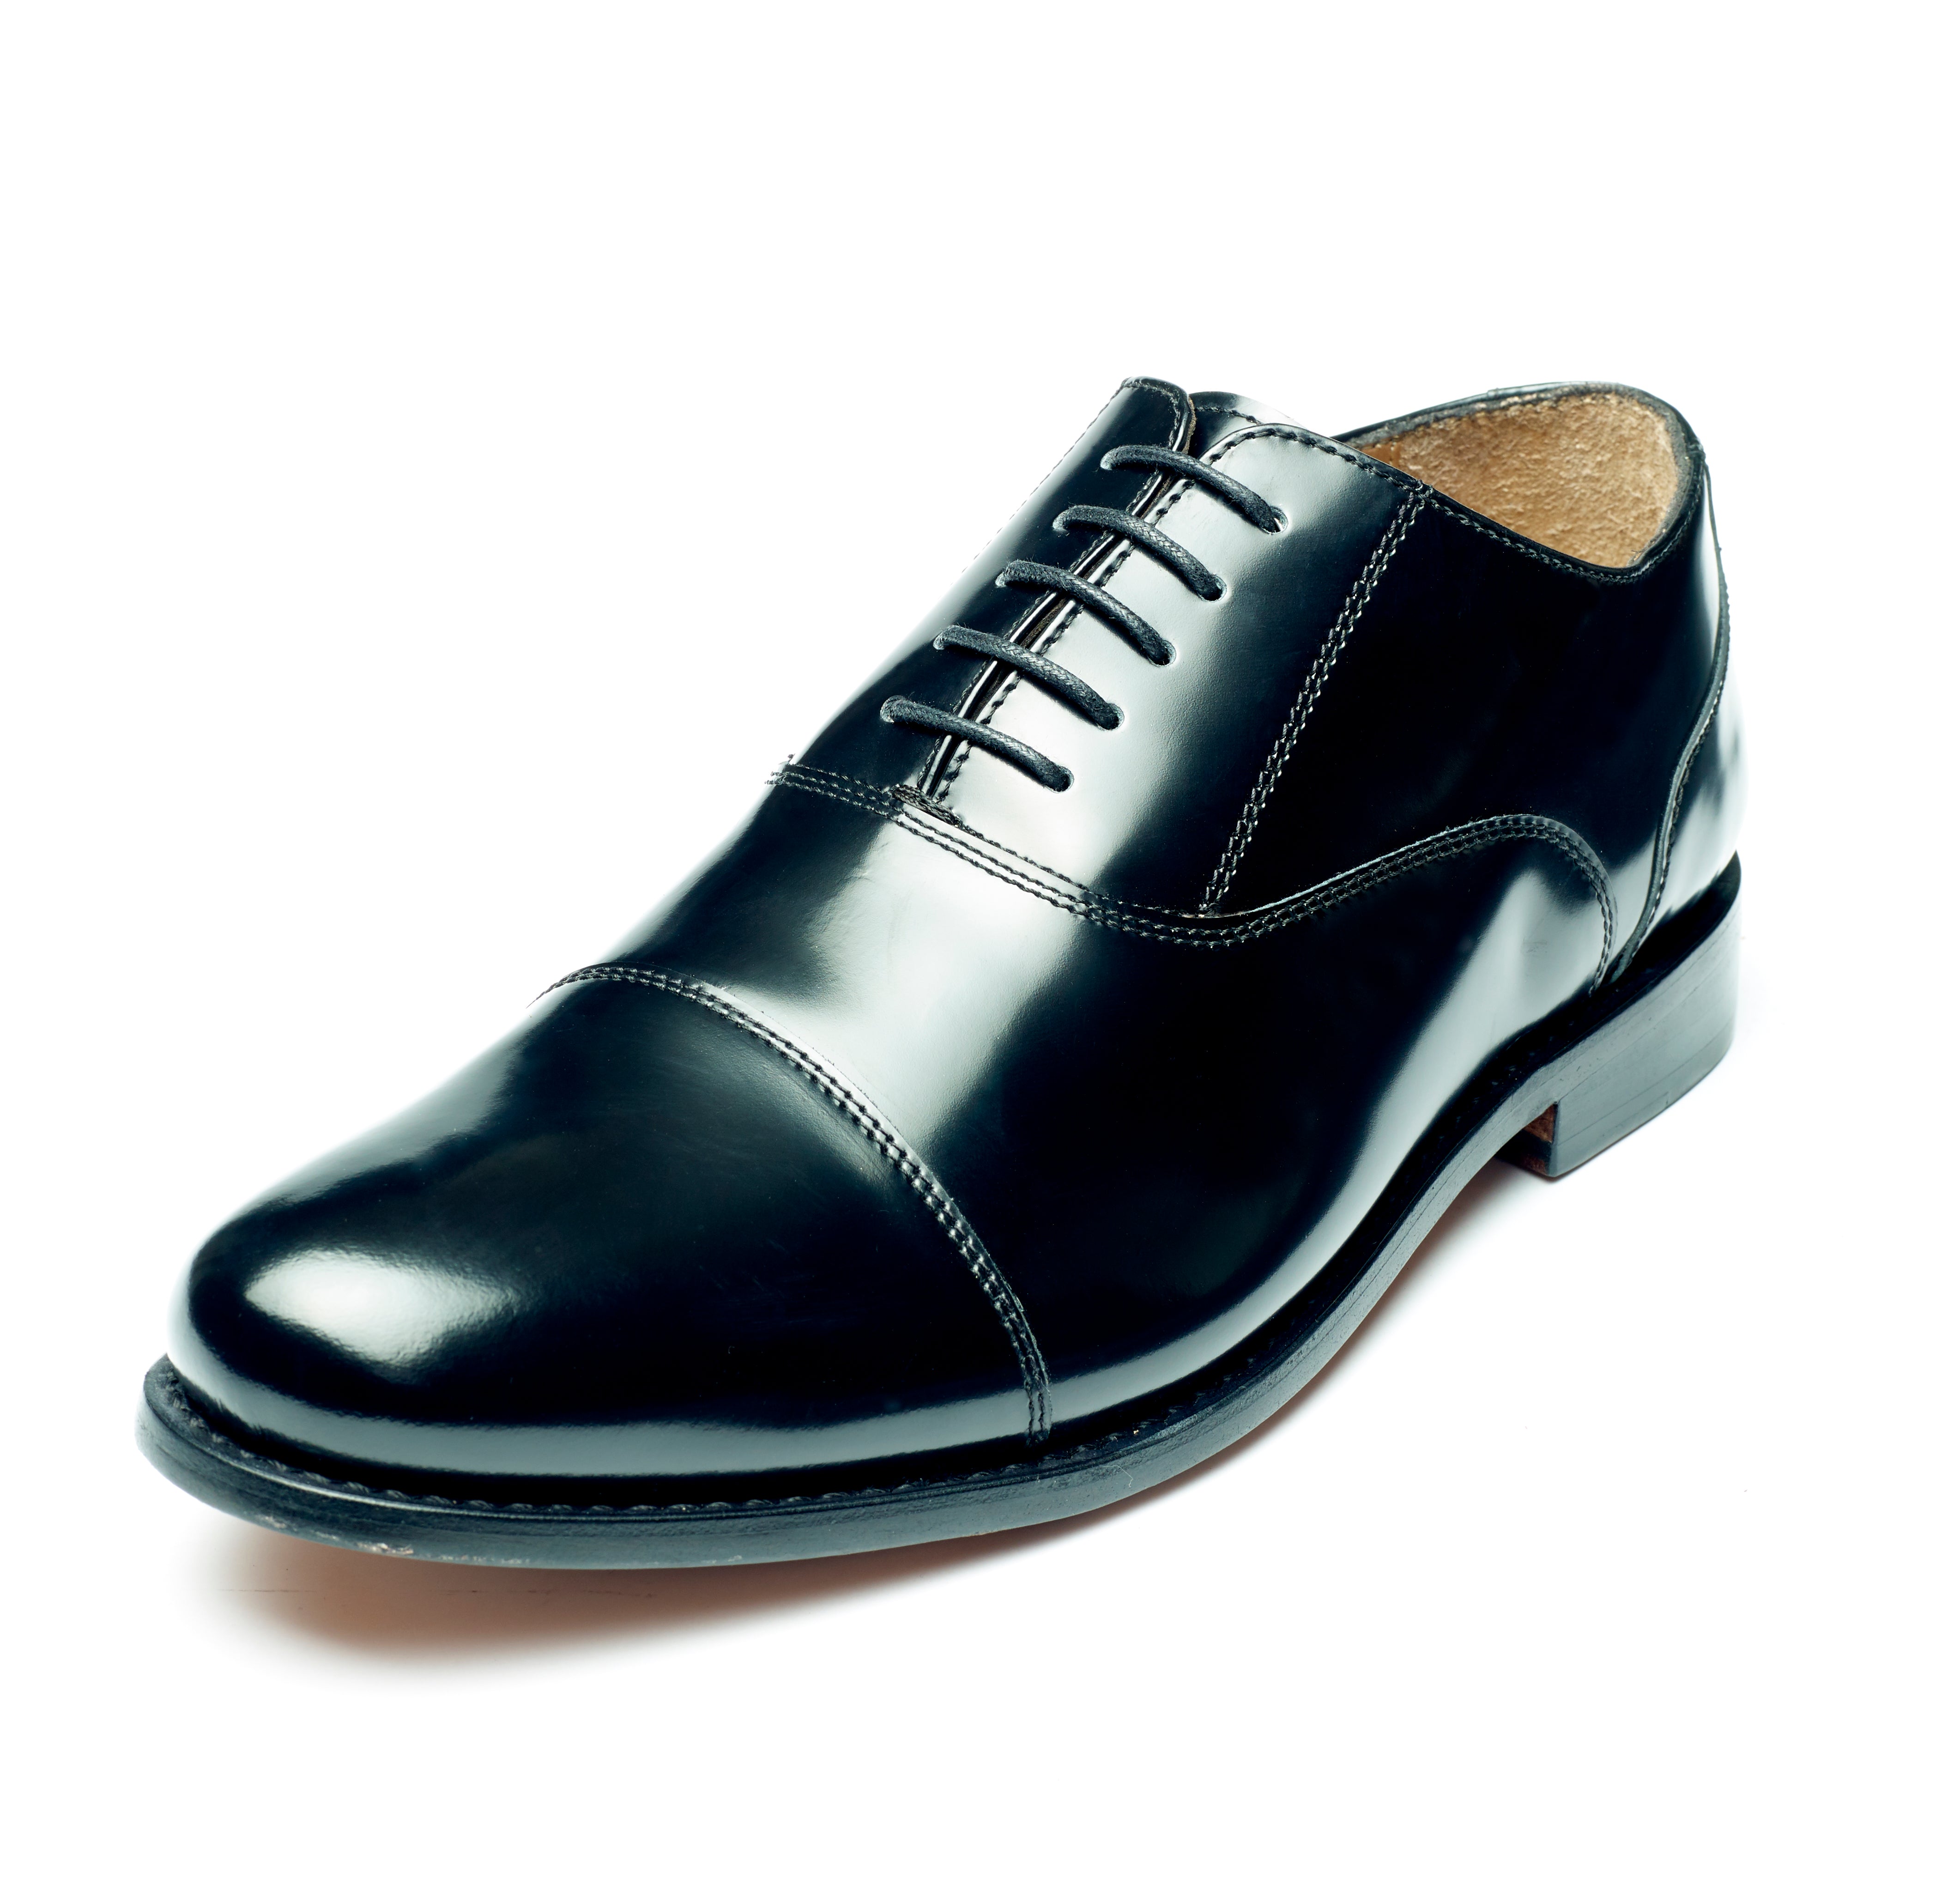 patent leather brogues mens